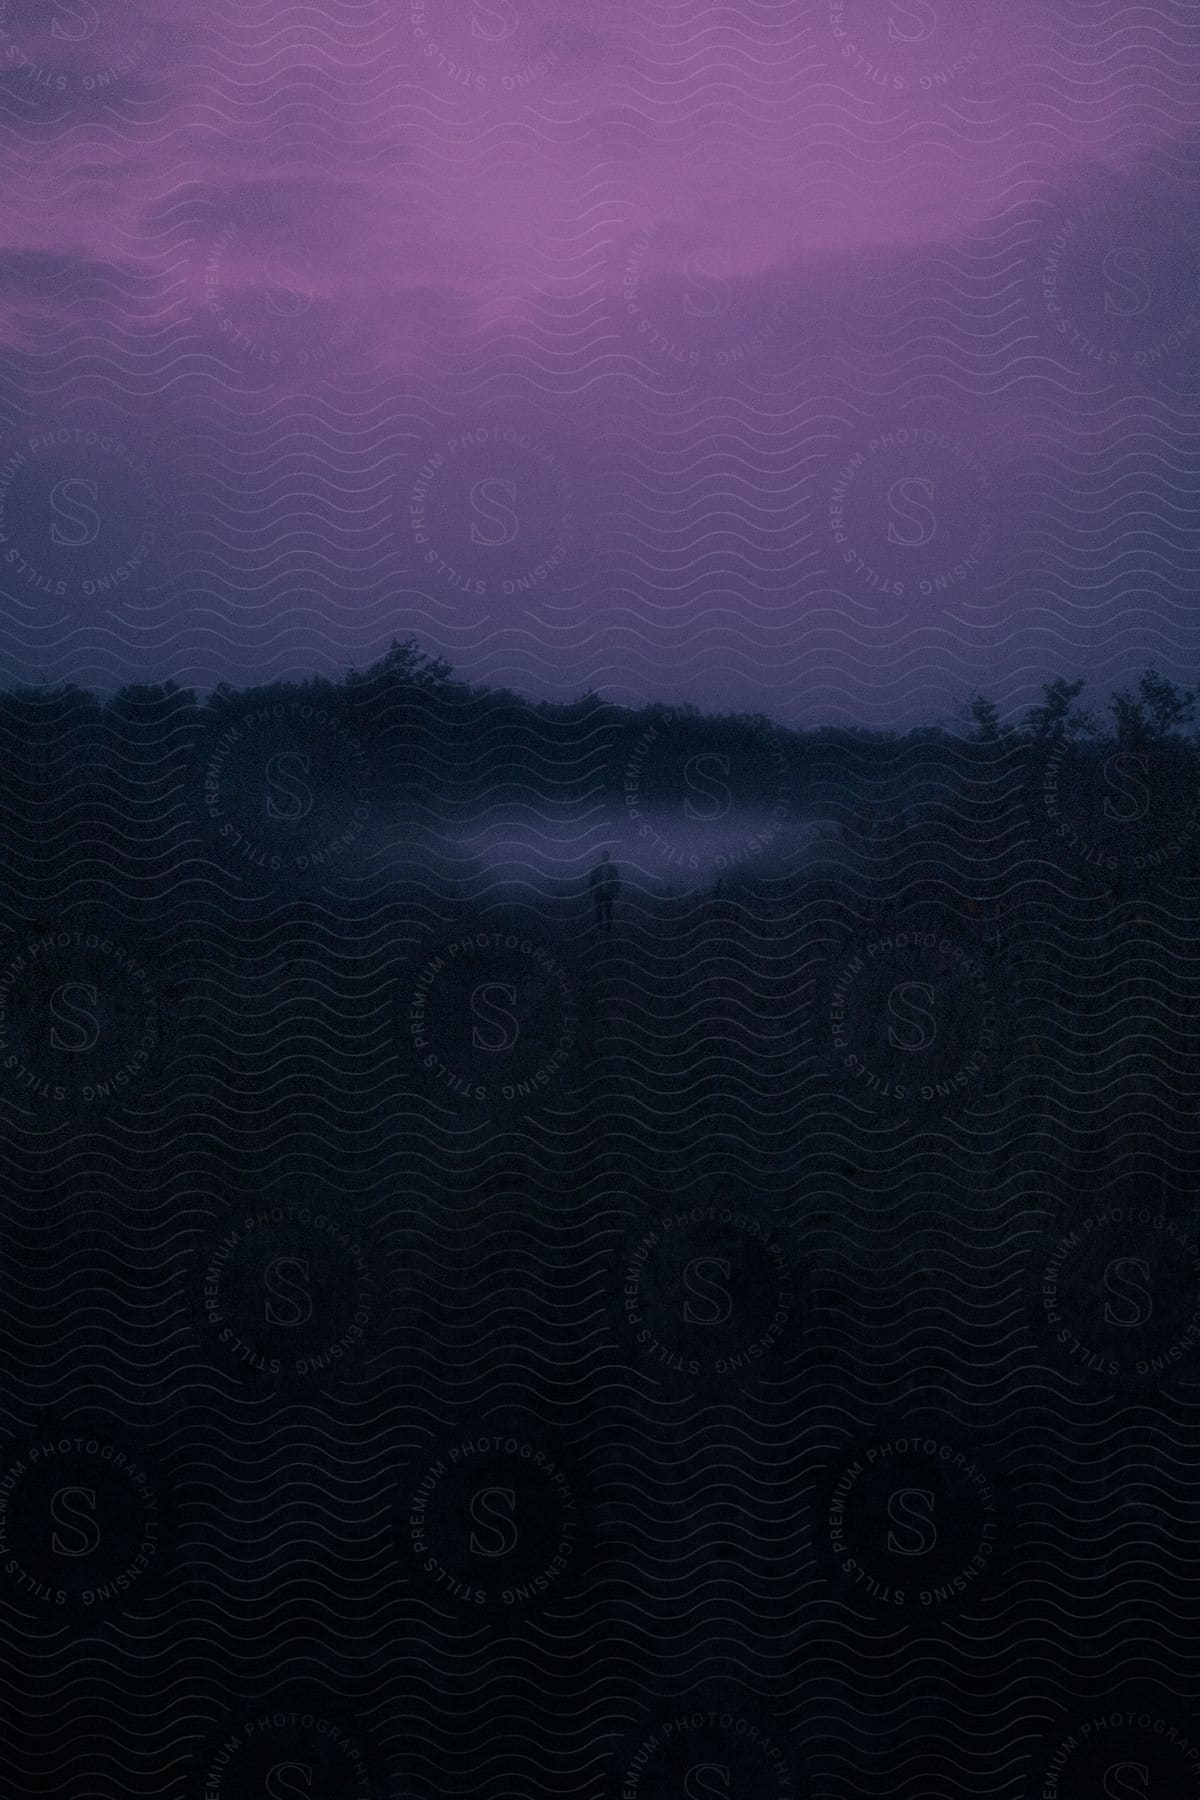 The figure of a man walking in a purple haze through nature